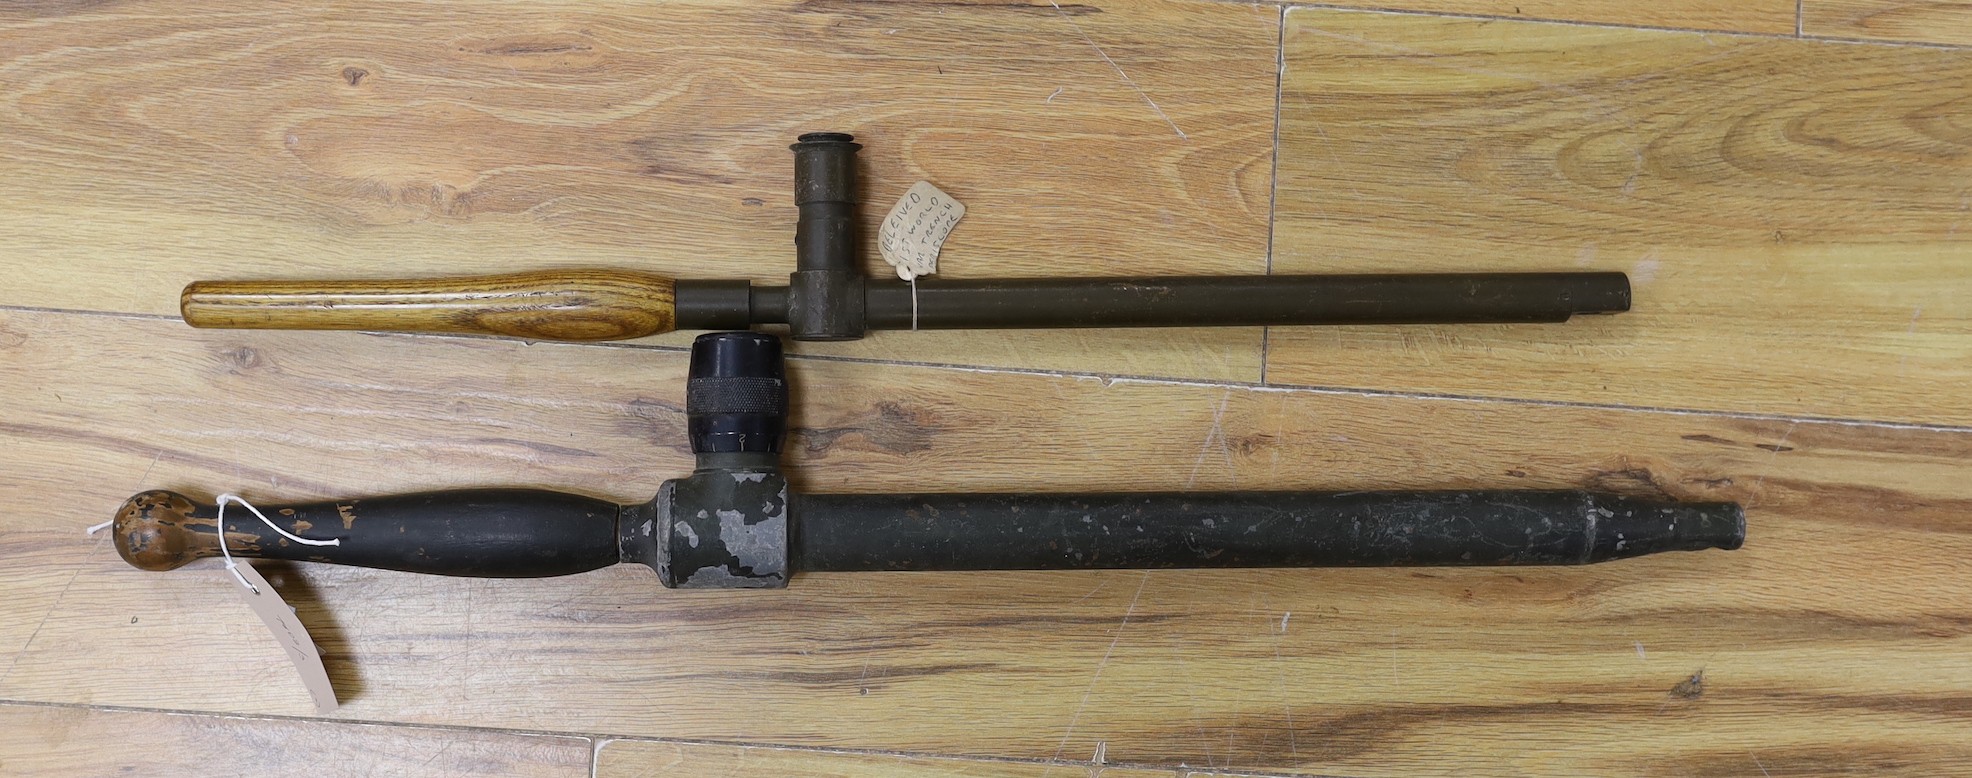 A German trench periscope by Ertel & Schn and another by R and J Beck